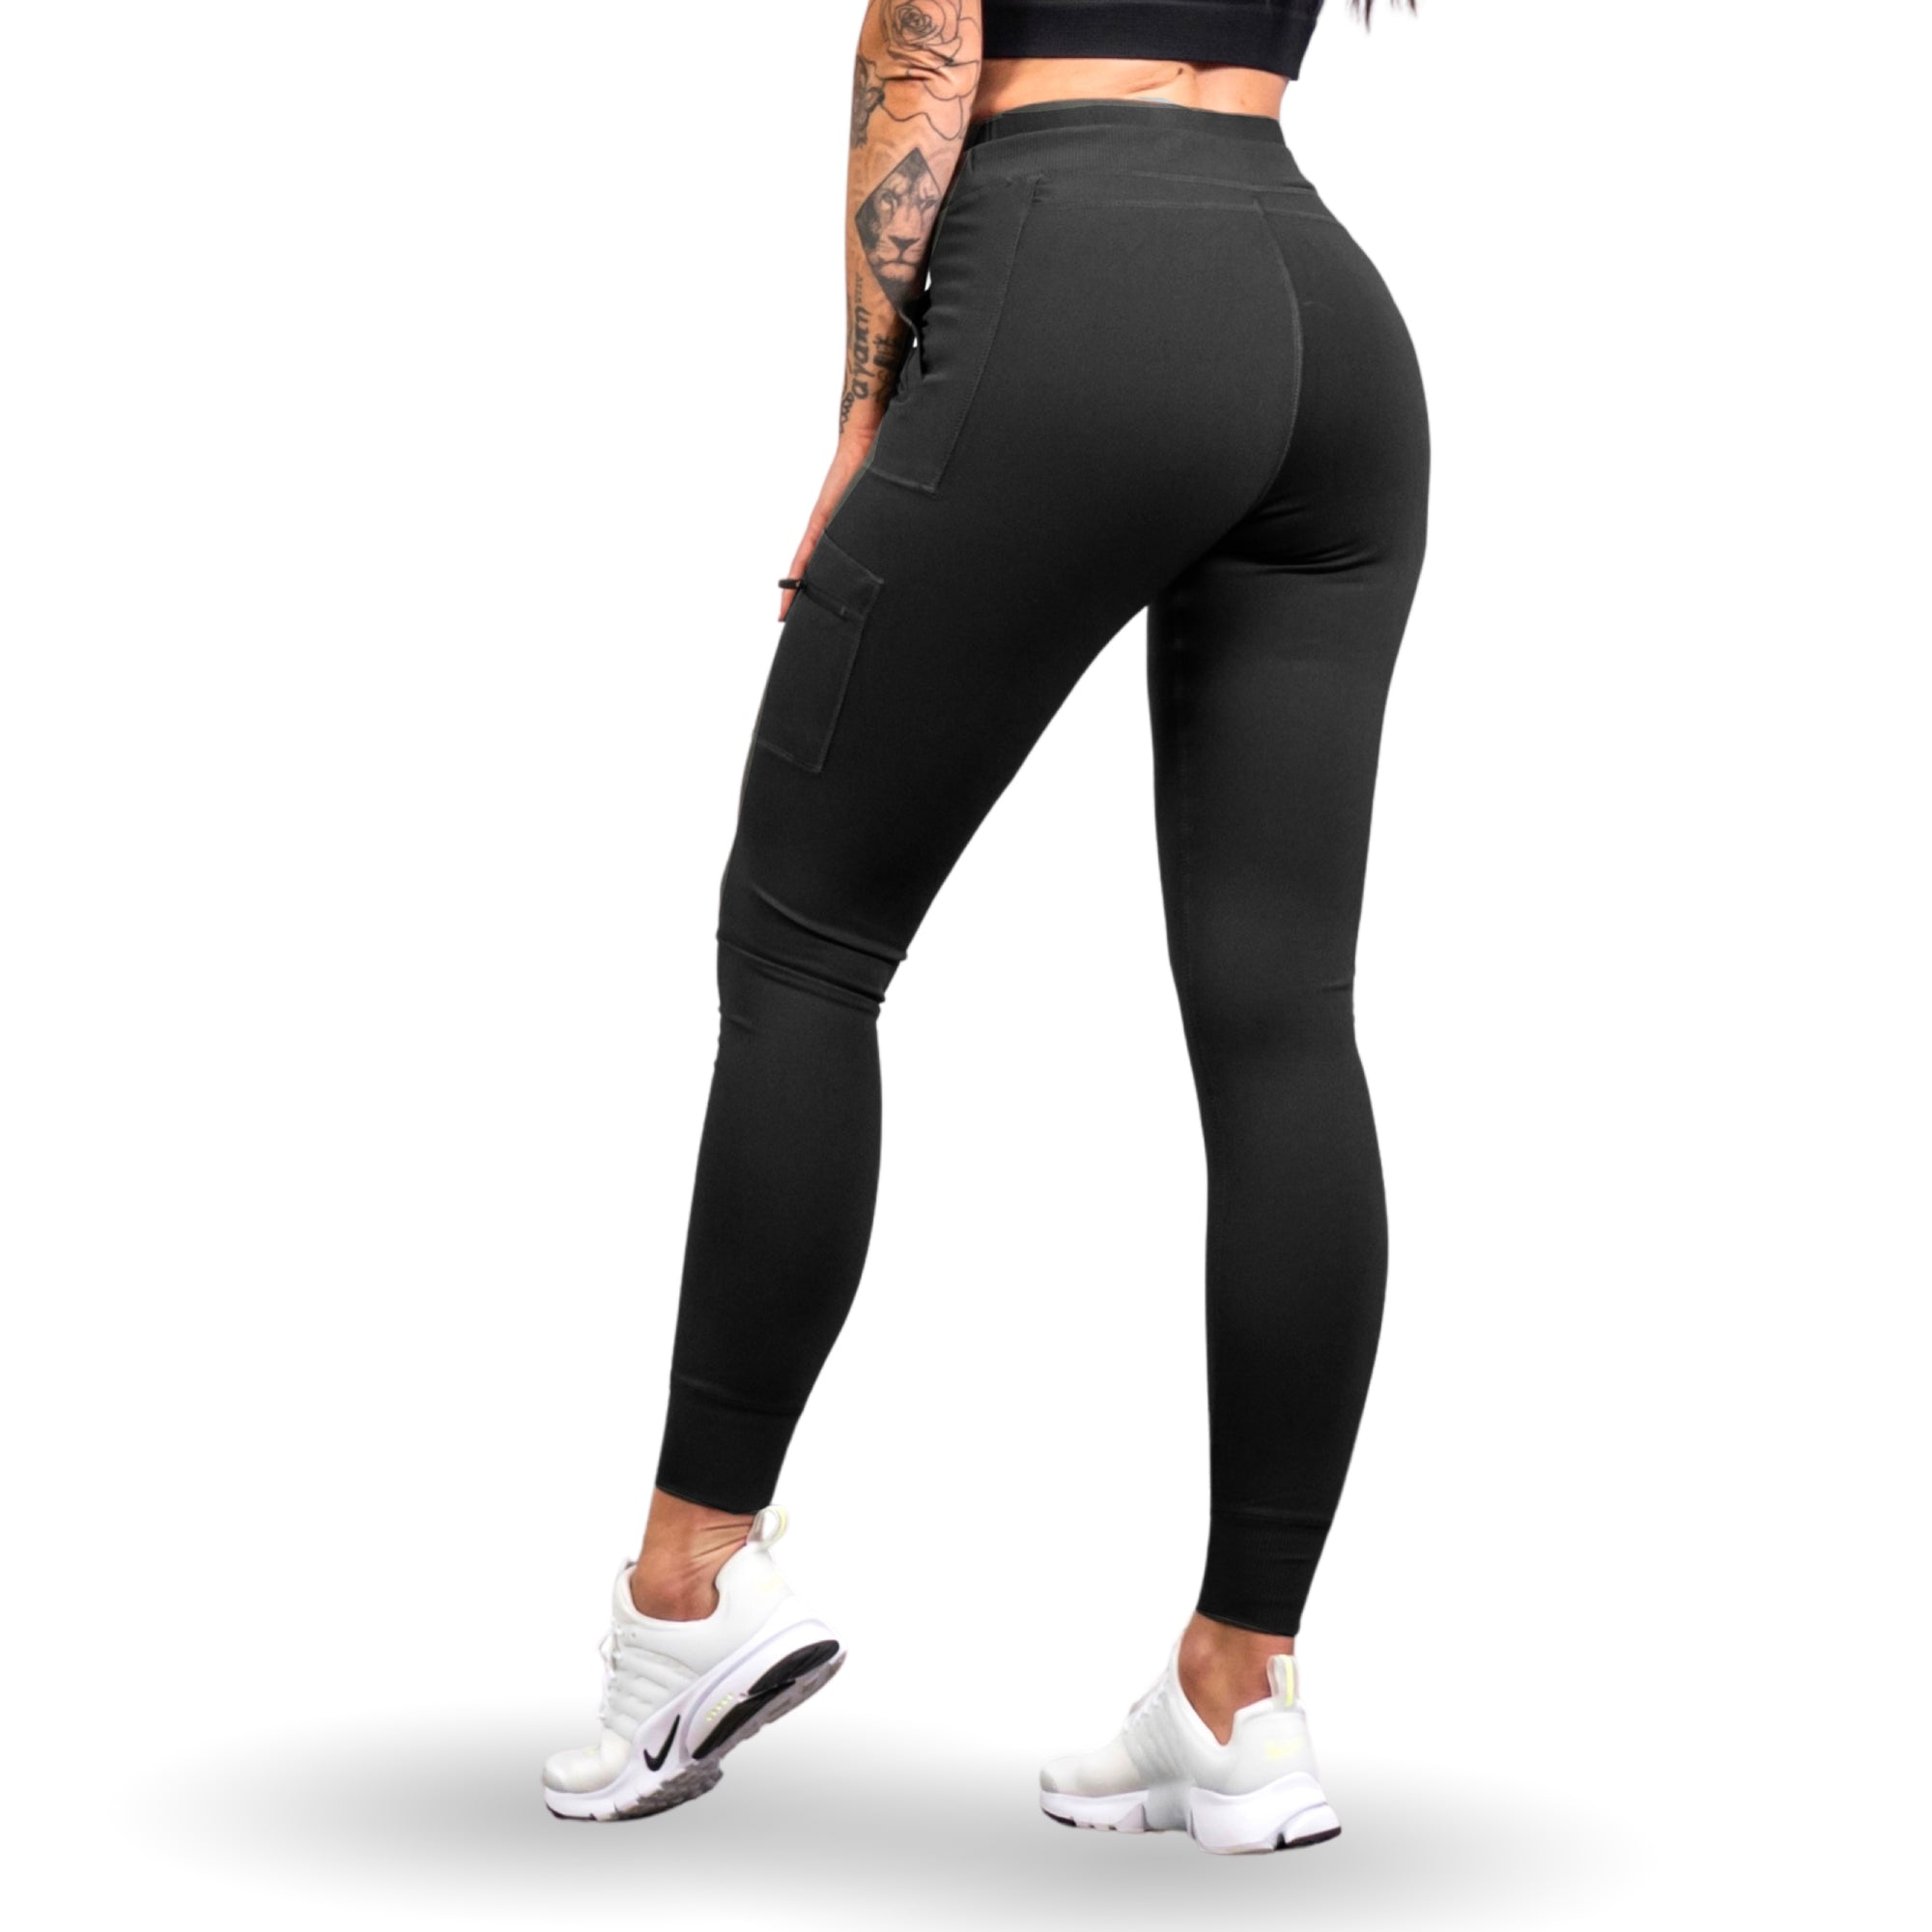 Solo cargo leggings are made from a high-performance fabric that